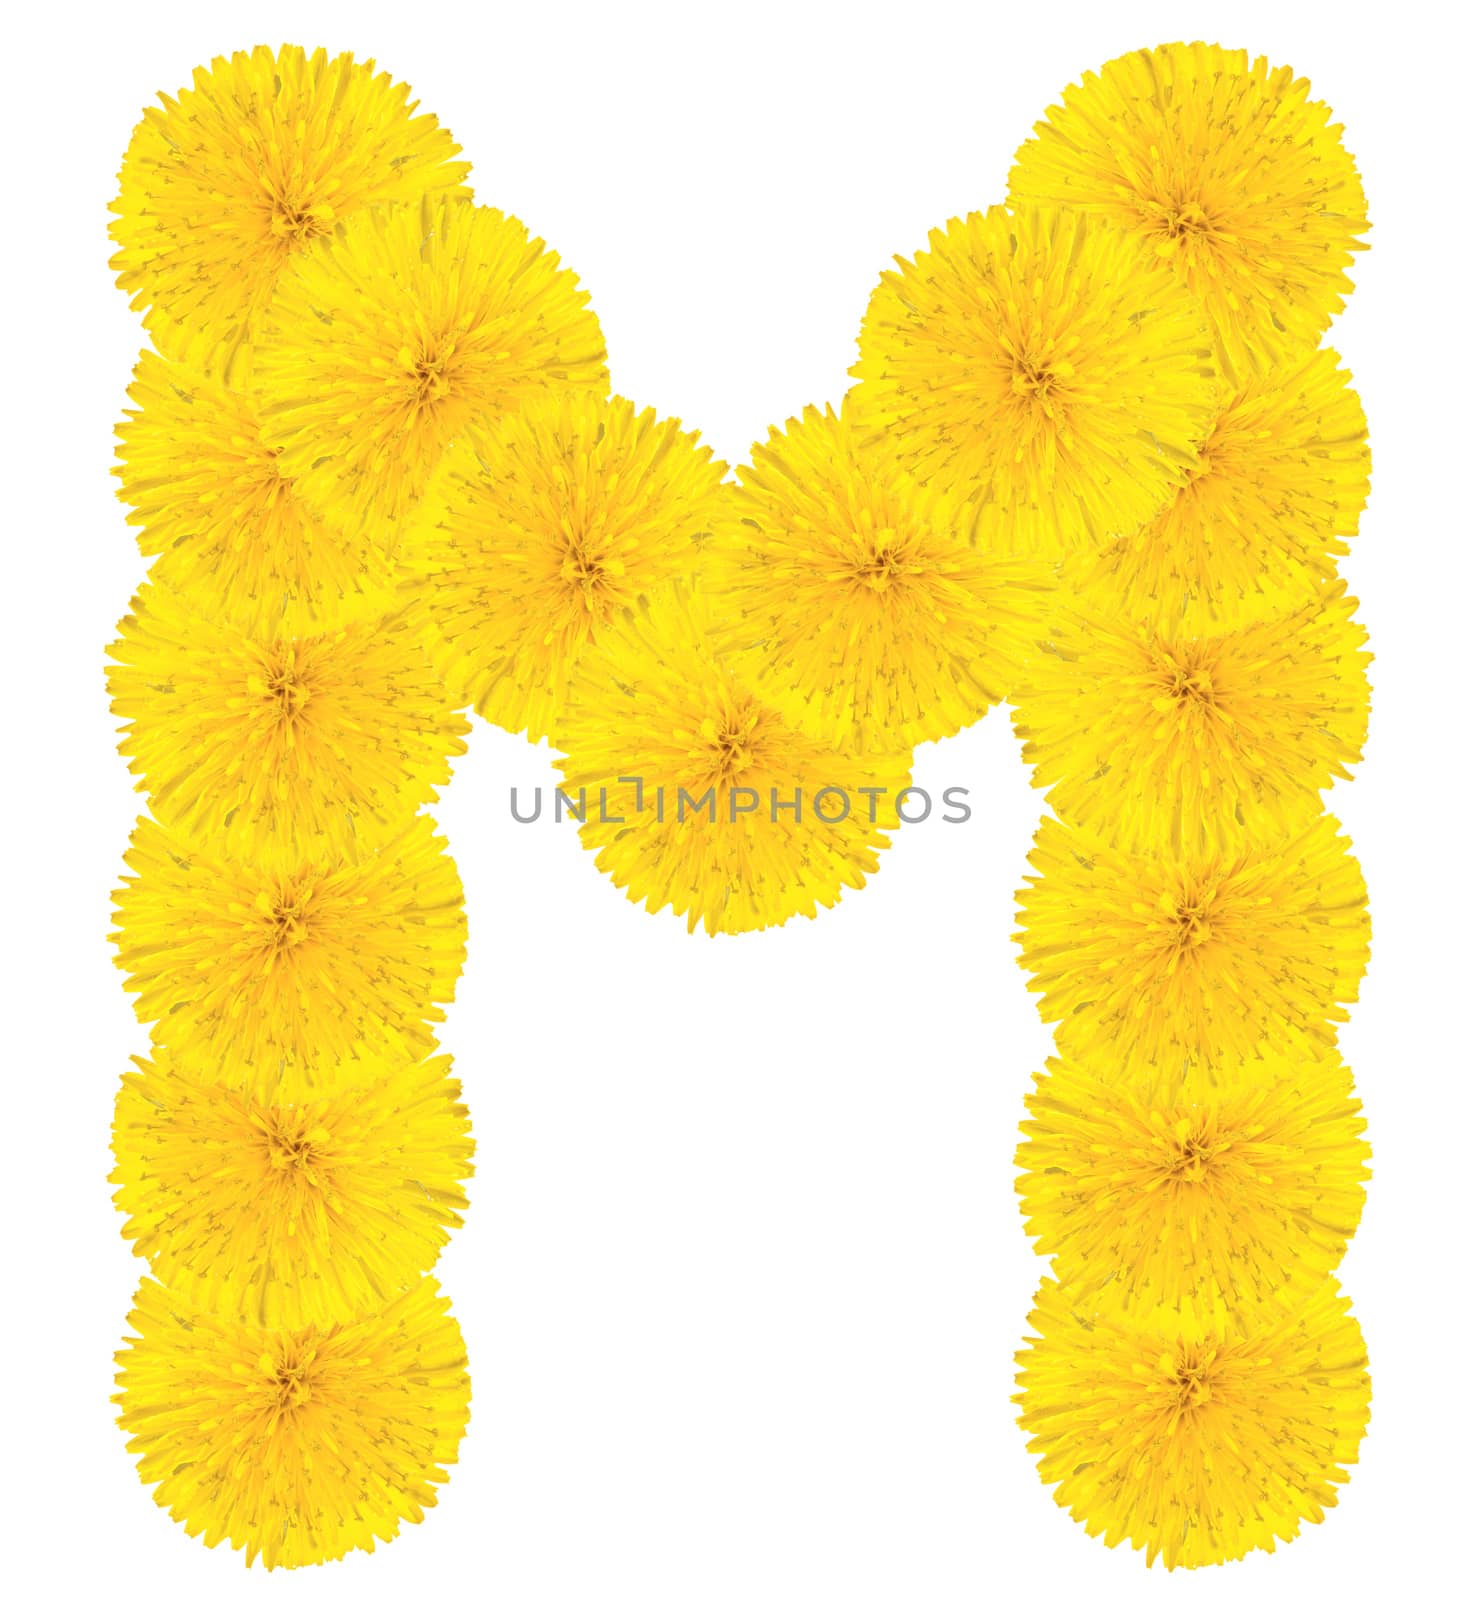 Letter M made from dandelions by Valengilda